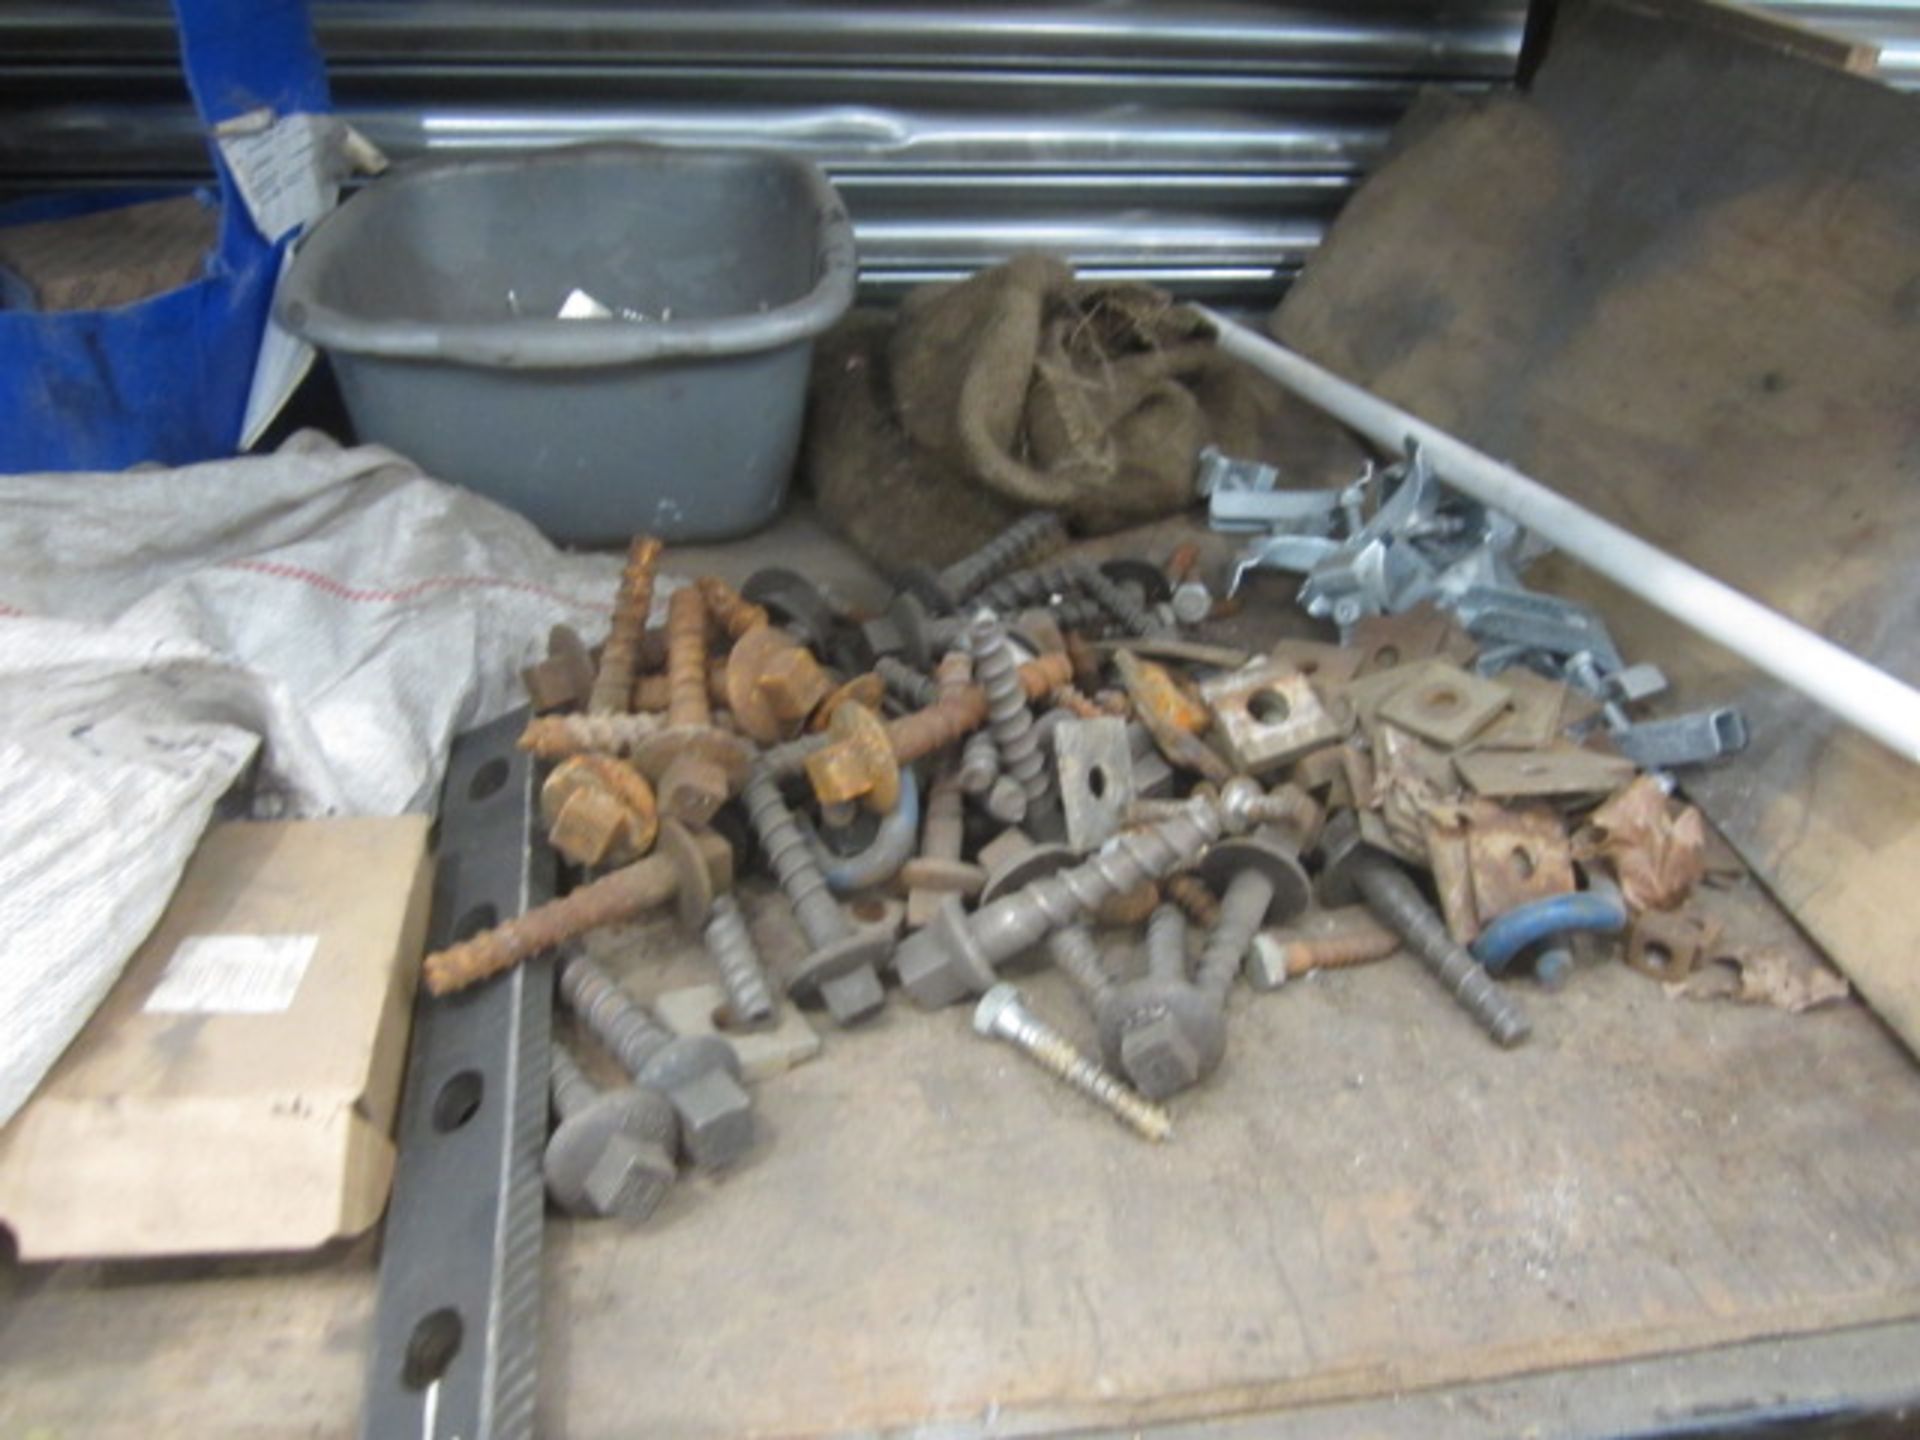 Contents of bay of racking including steel profiles, heavy duty bolts, metal clips etc., as lotted - - Image 10 of 19